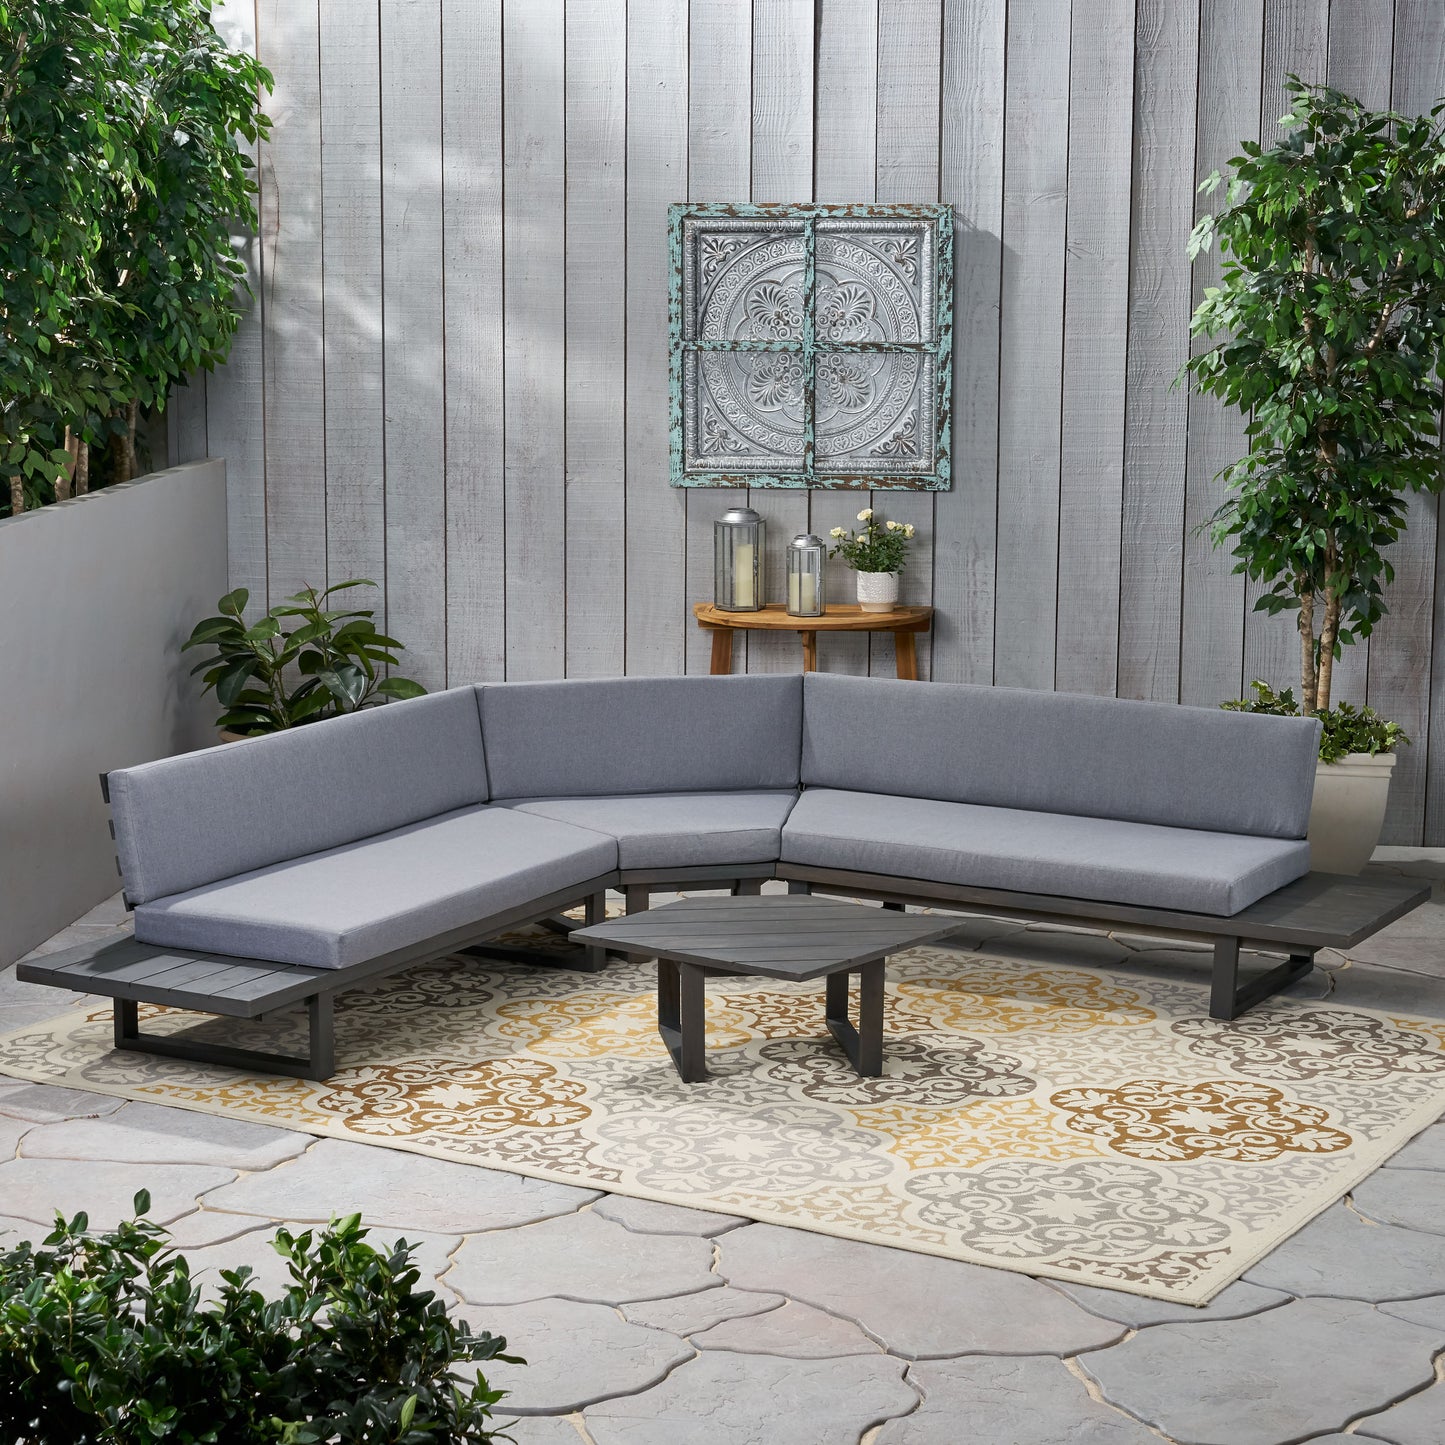 Manna Outdoor Acacia Wood 5 Seater Sectional Sofa Set with Water-Resistant Cushions